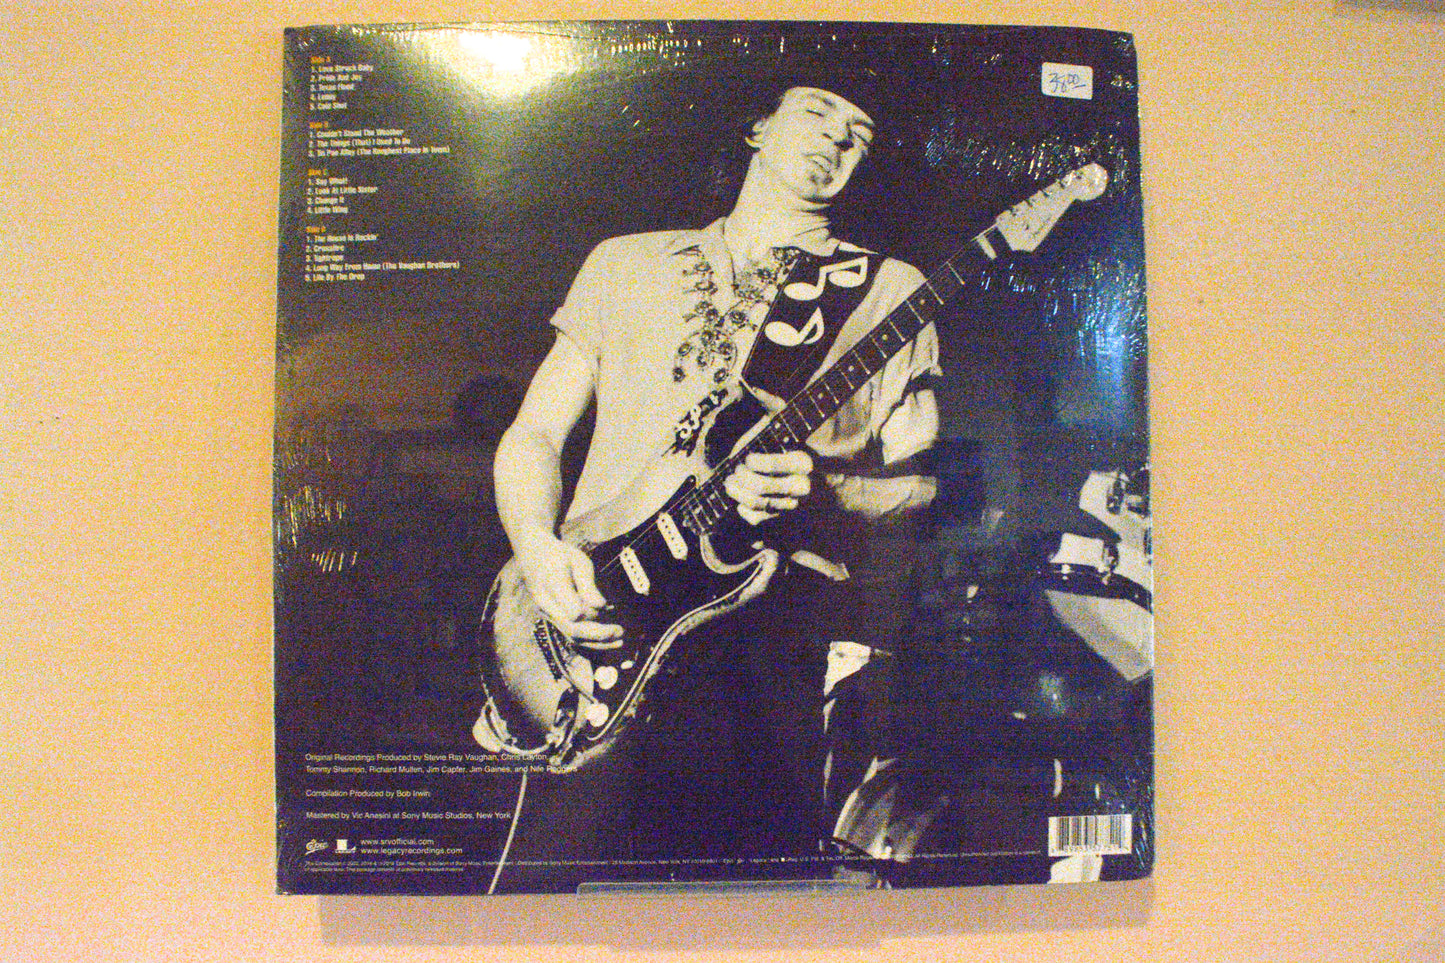 The Essential Steve Ray Vaughan and Double Trouble LP